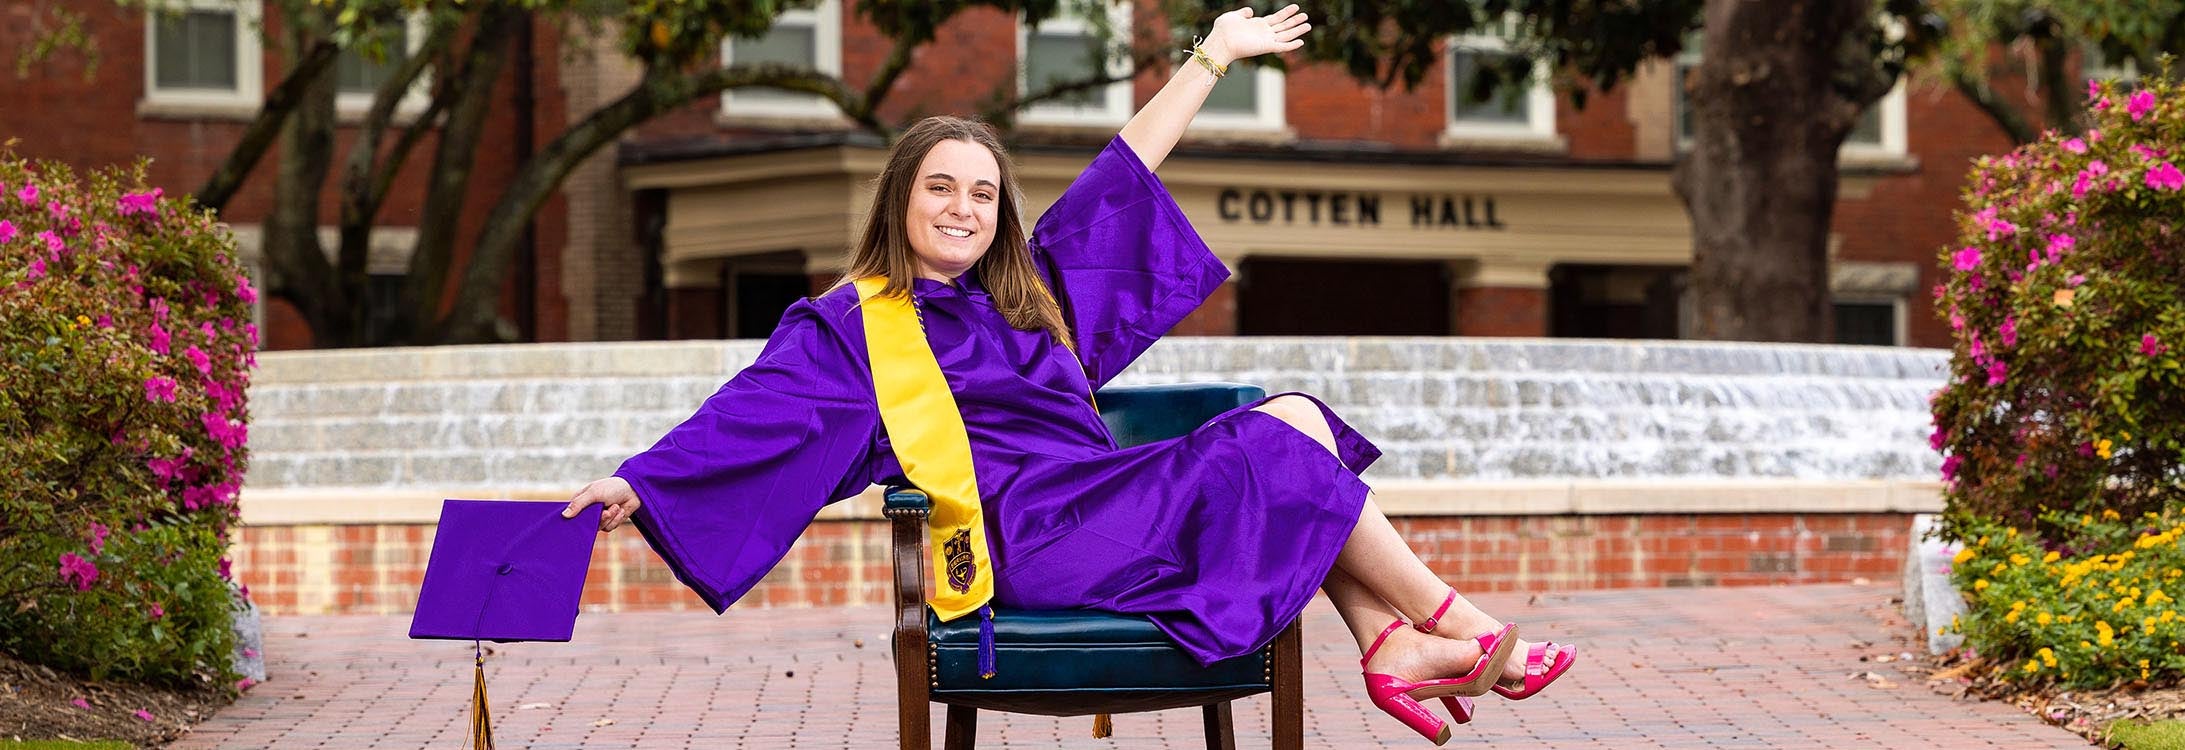 Abby Coderre, of Wilmington, becomes a member of Pirate Nurse Nation, having completed nursing school and treatment for an aggressive form of cancer simultaneously.